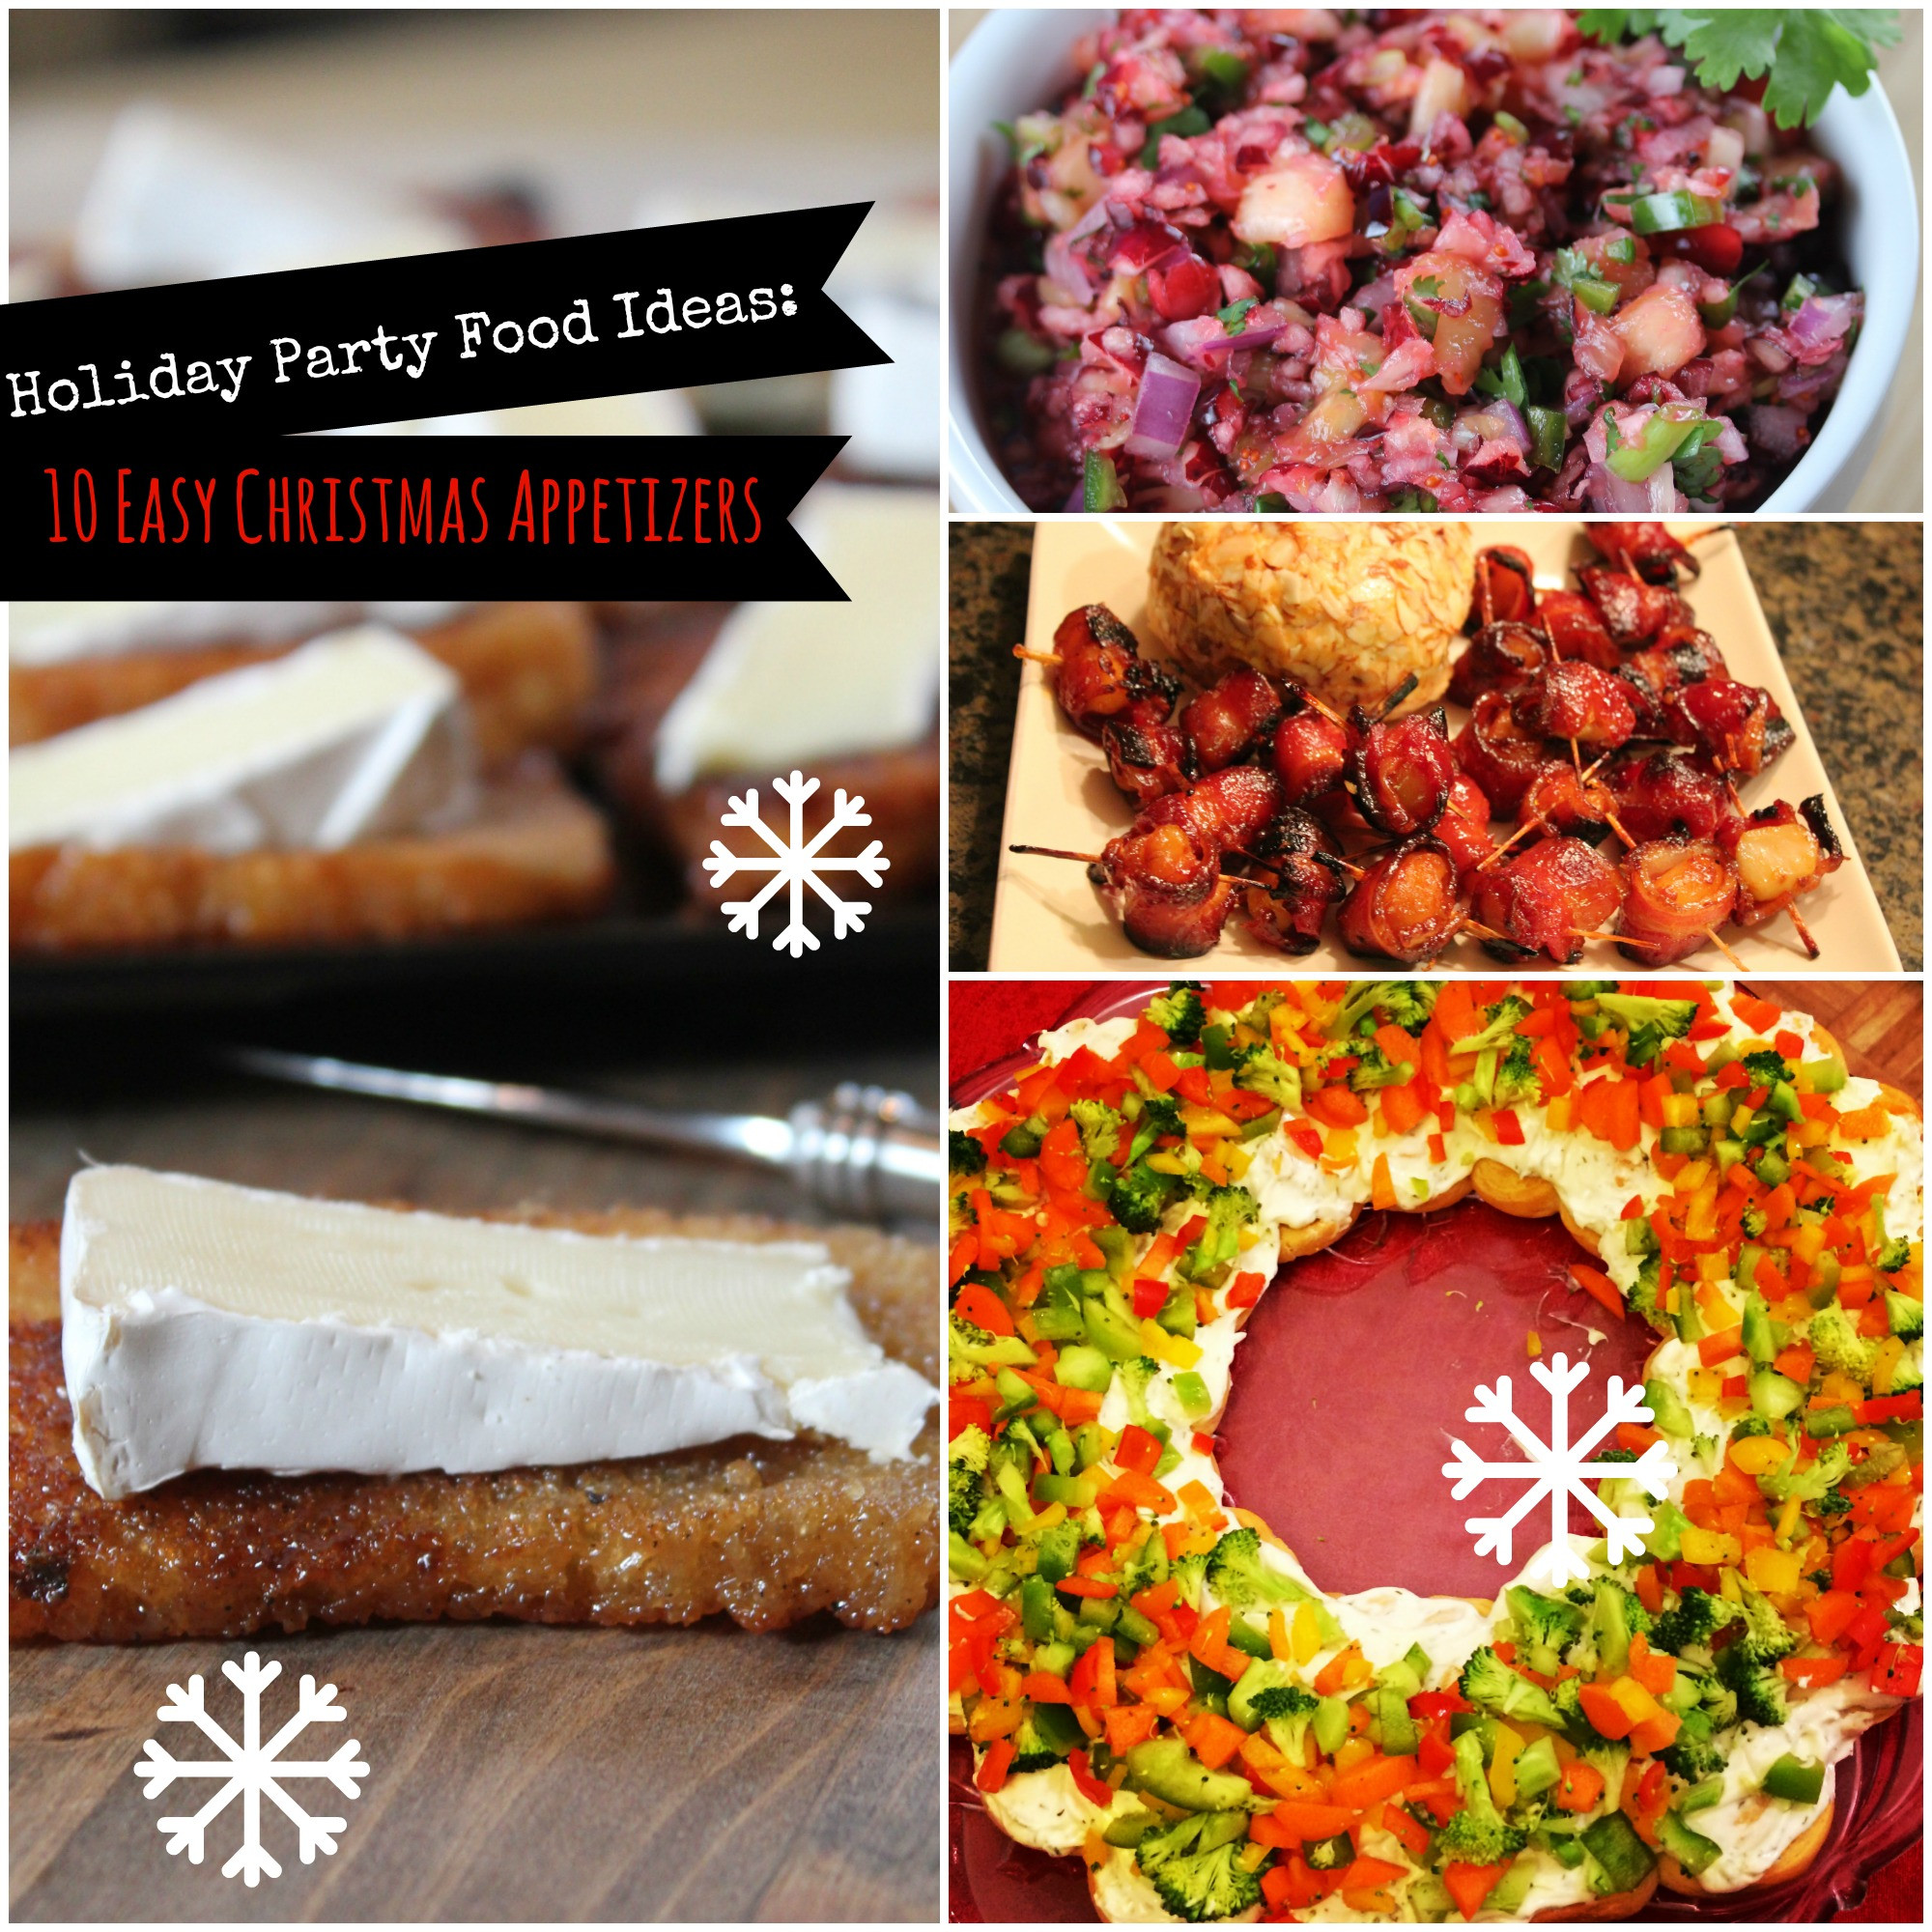 Children'S Christmas Party Food Ideas
 Holiday Party Food Ideas 10 Easy Christmas Appetizers